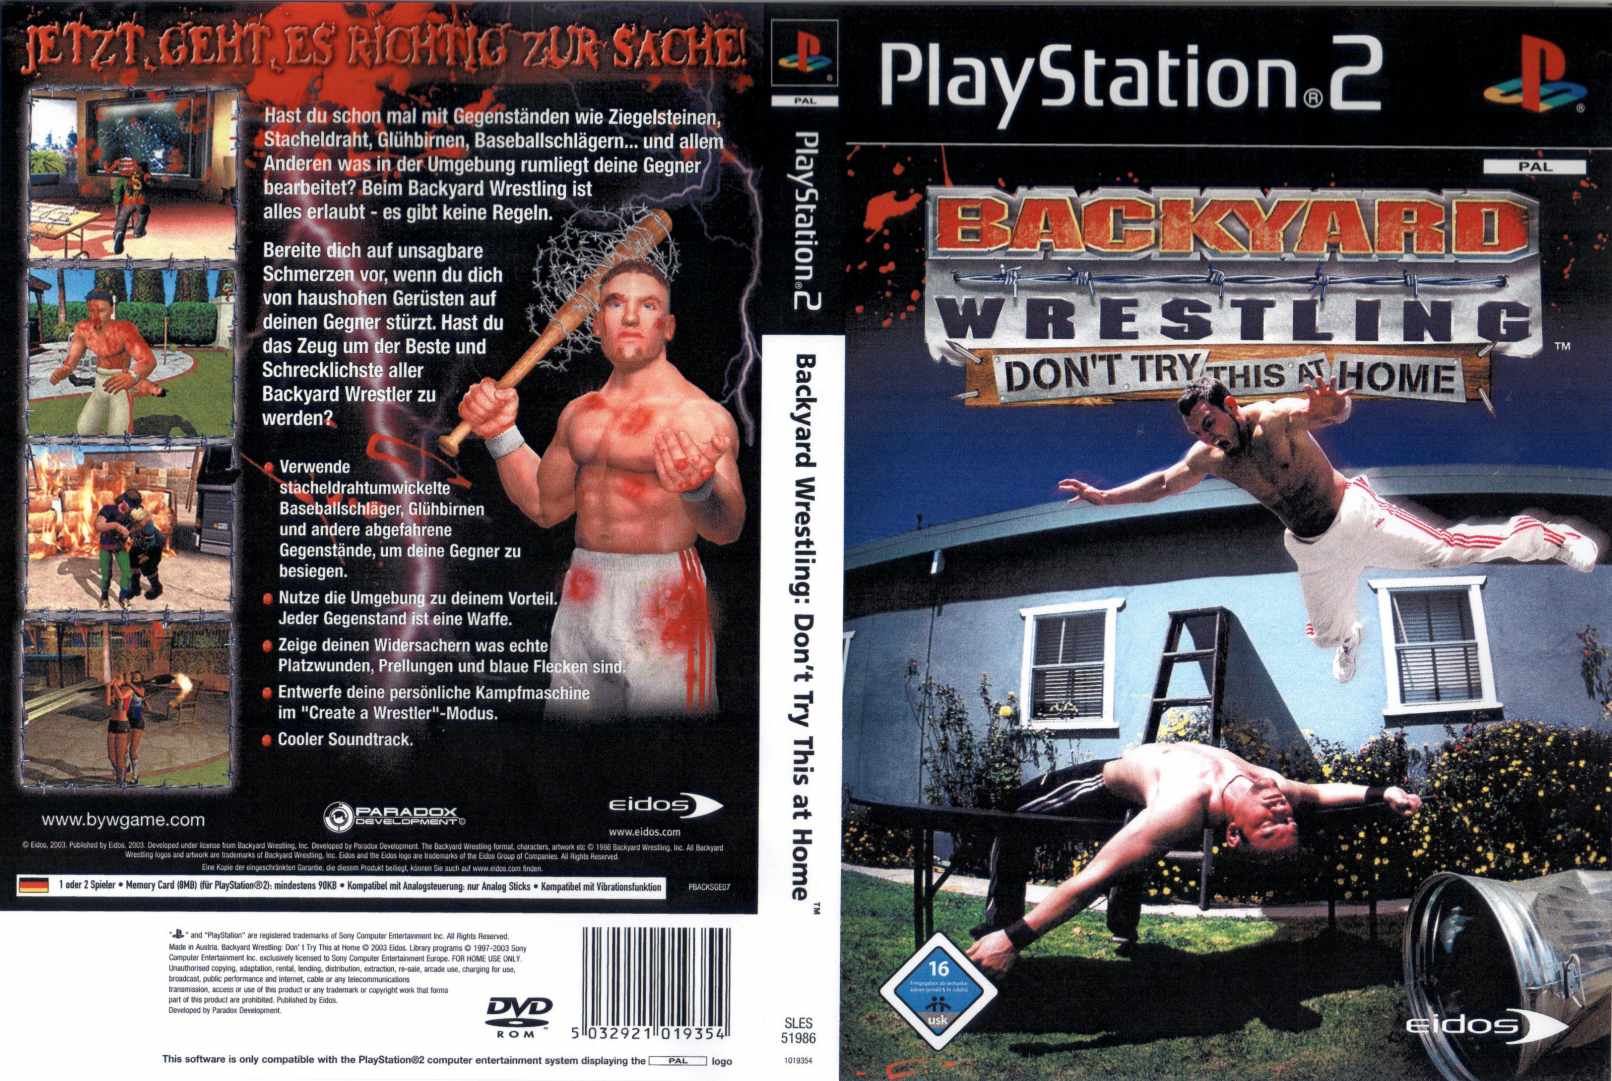 Backyard Wrestling Dont Try This At Home Full Playstation 2 Covers Cover Century Over 500000 Album Art Covers For Free